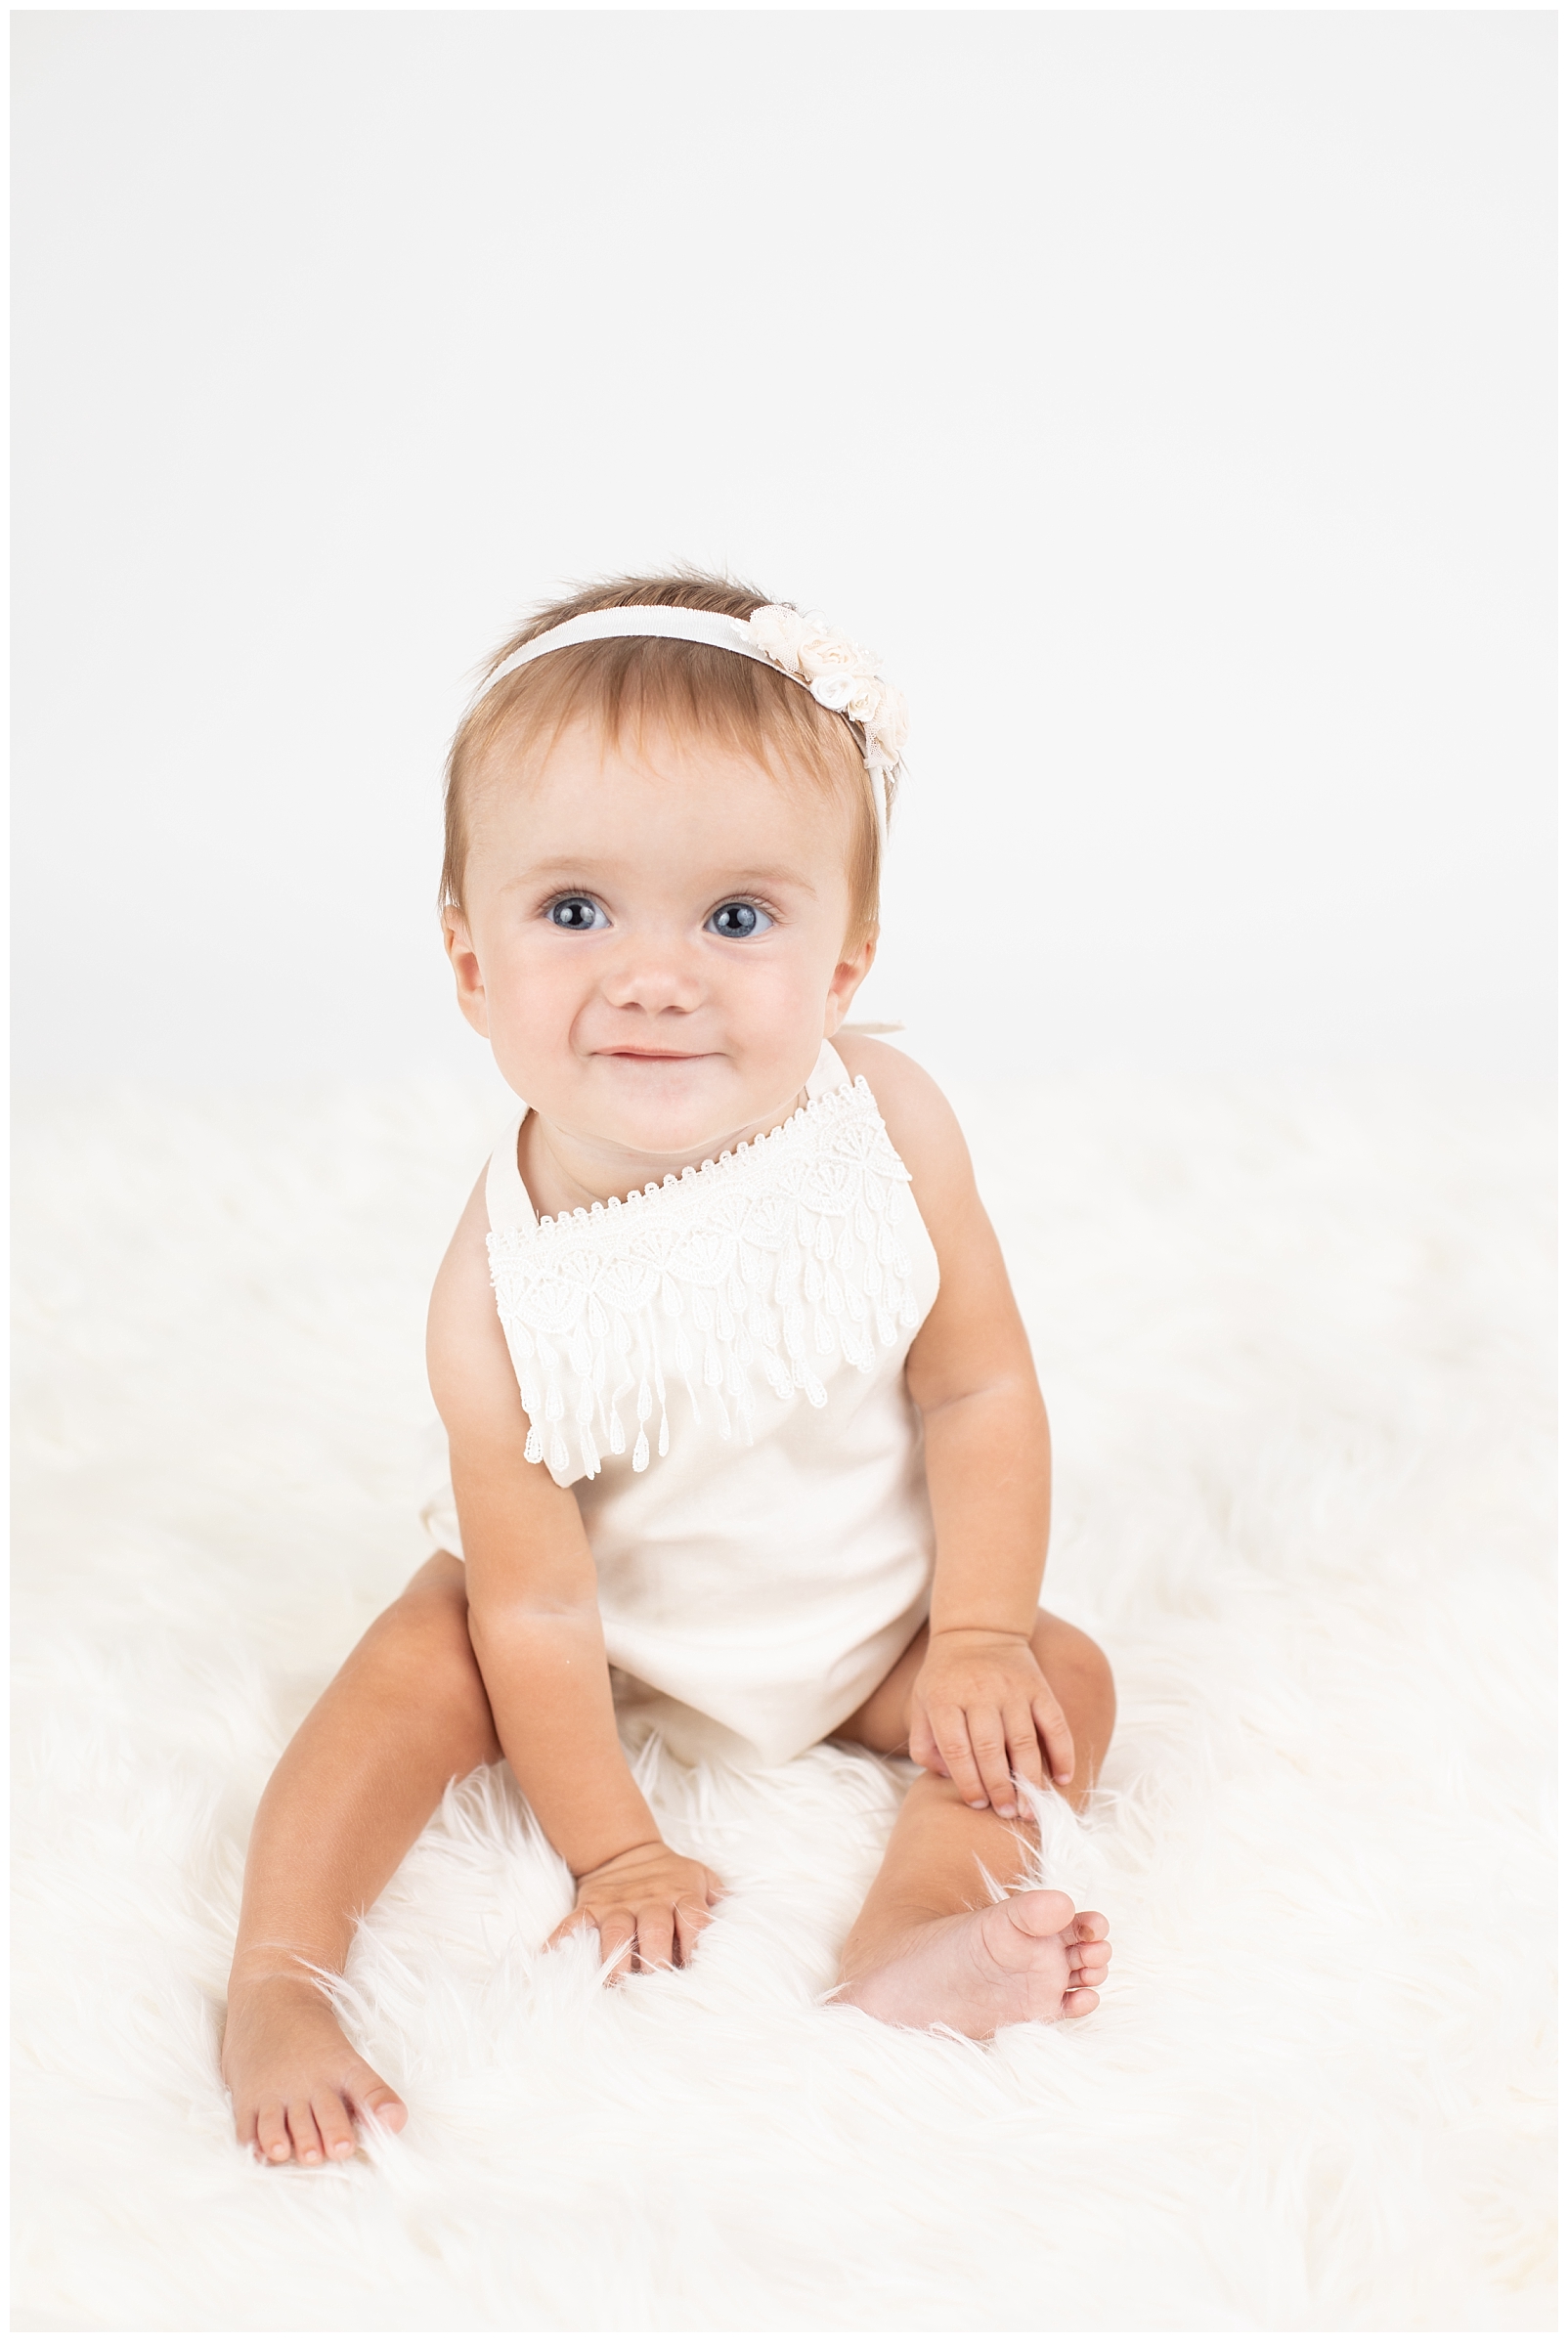 Smiling baby with a lace romper